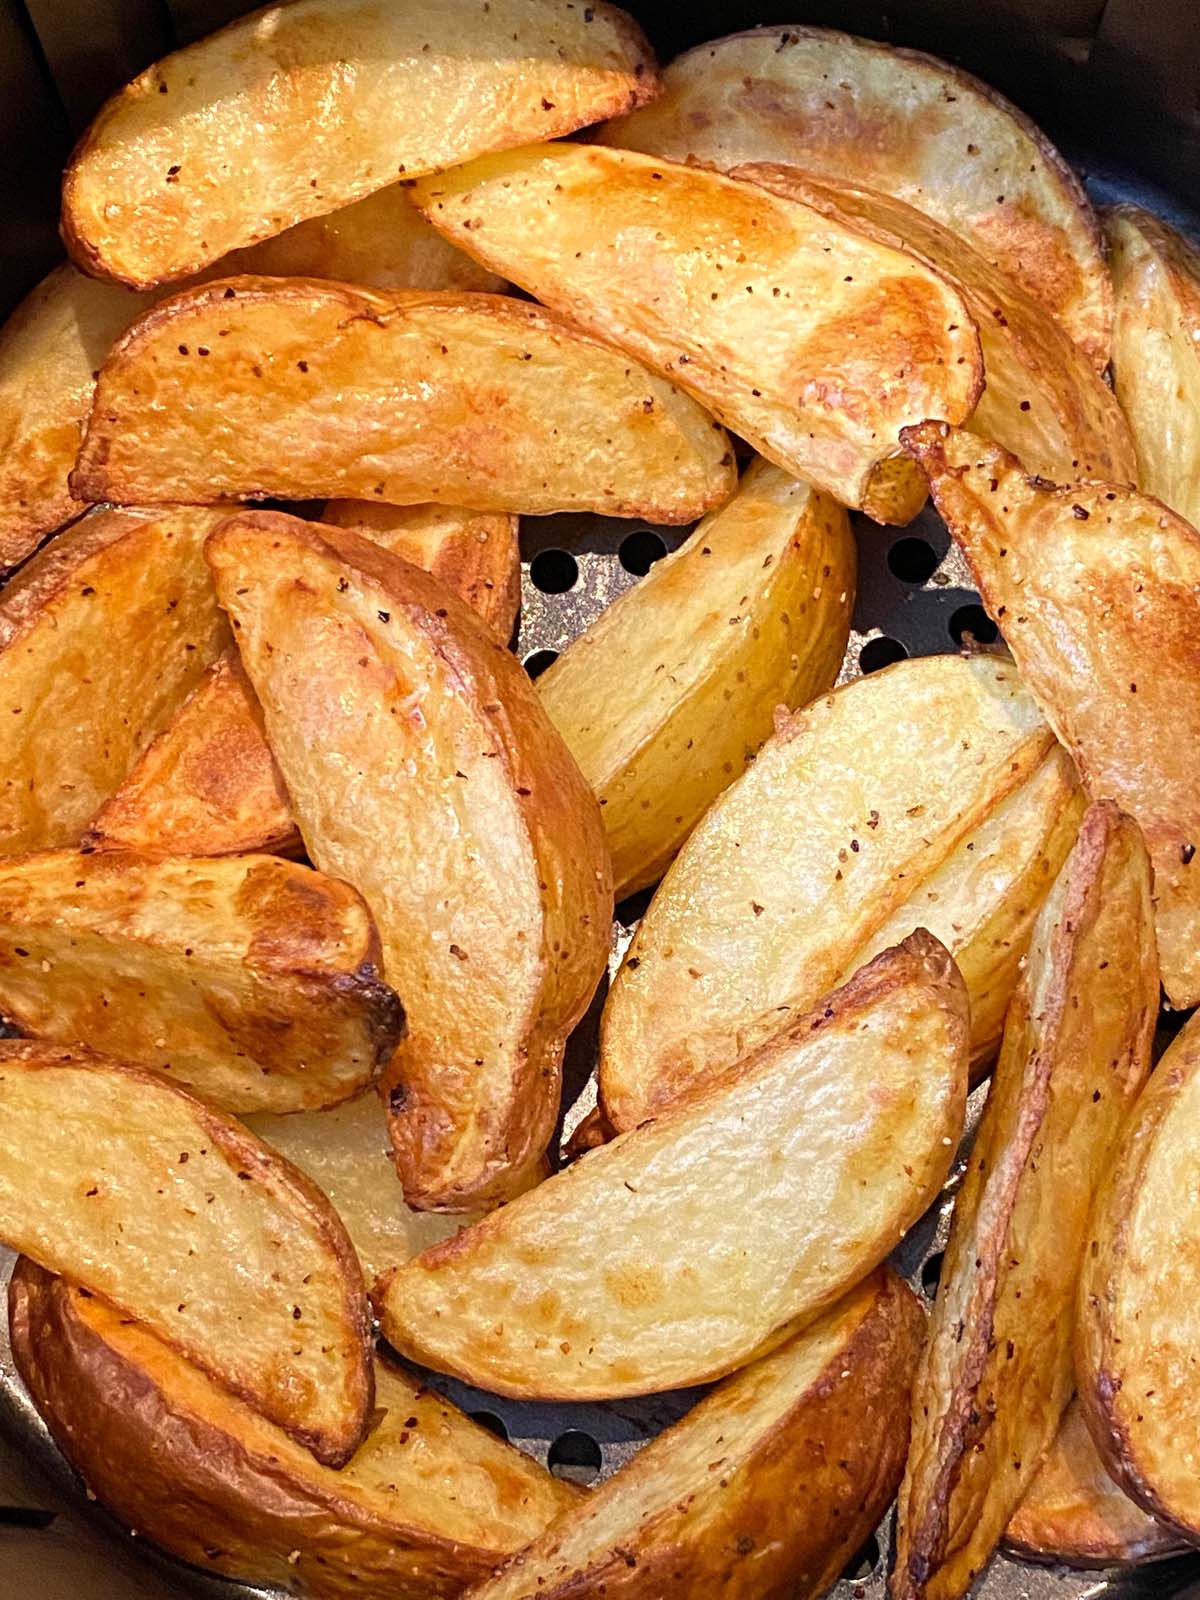 Cooked potato wedges in an air fryer.